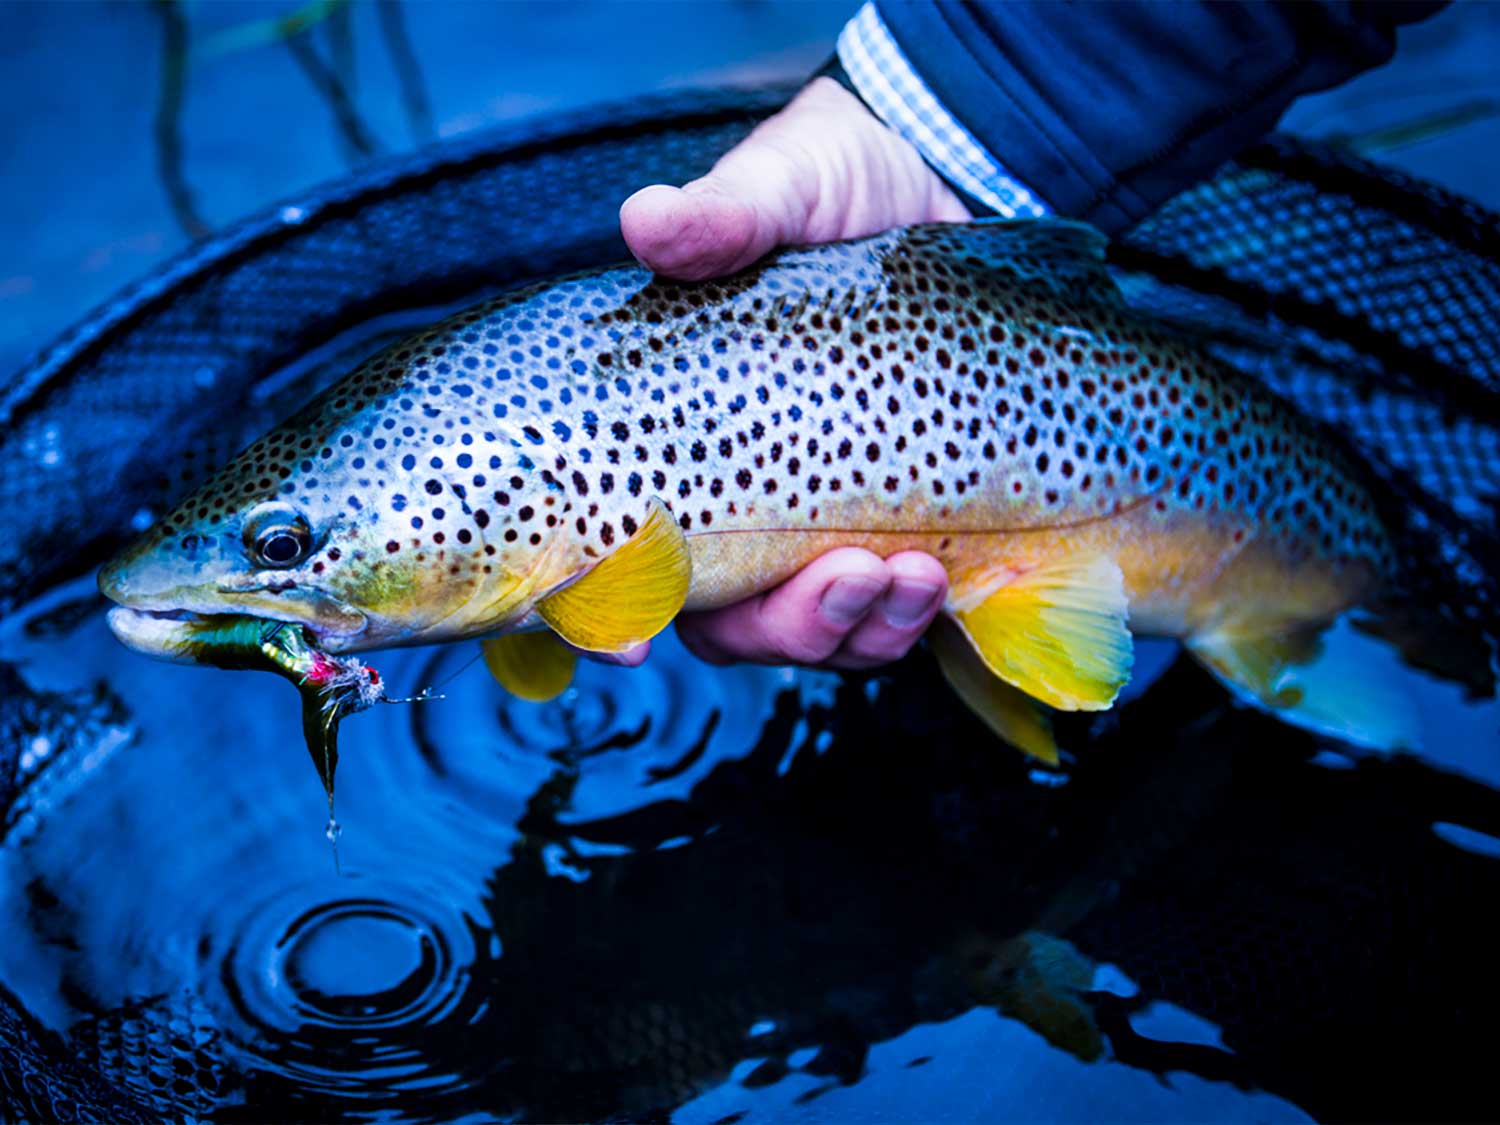 An angler holds a brown trout in his hand.